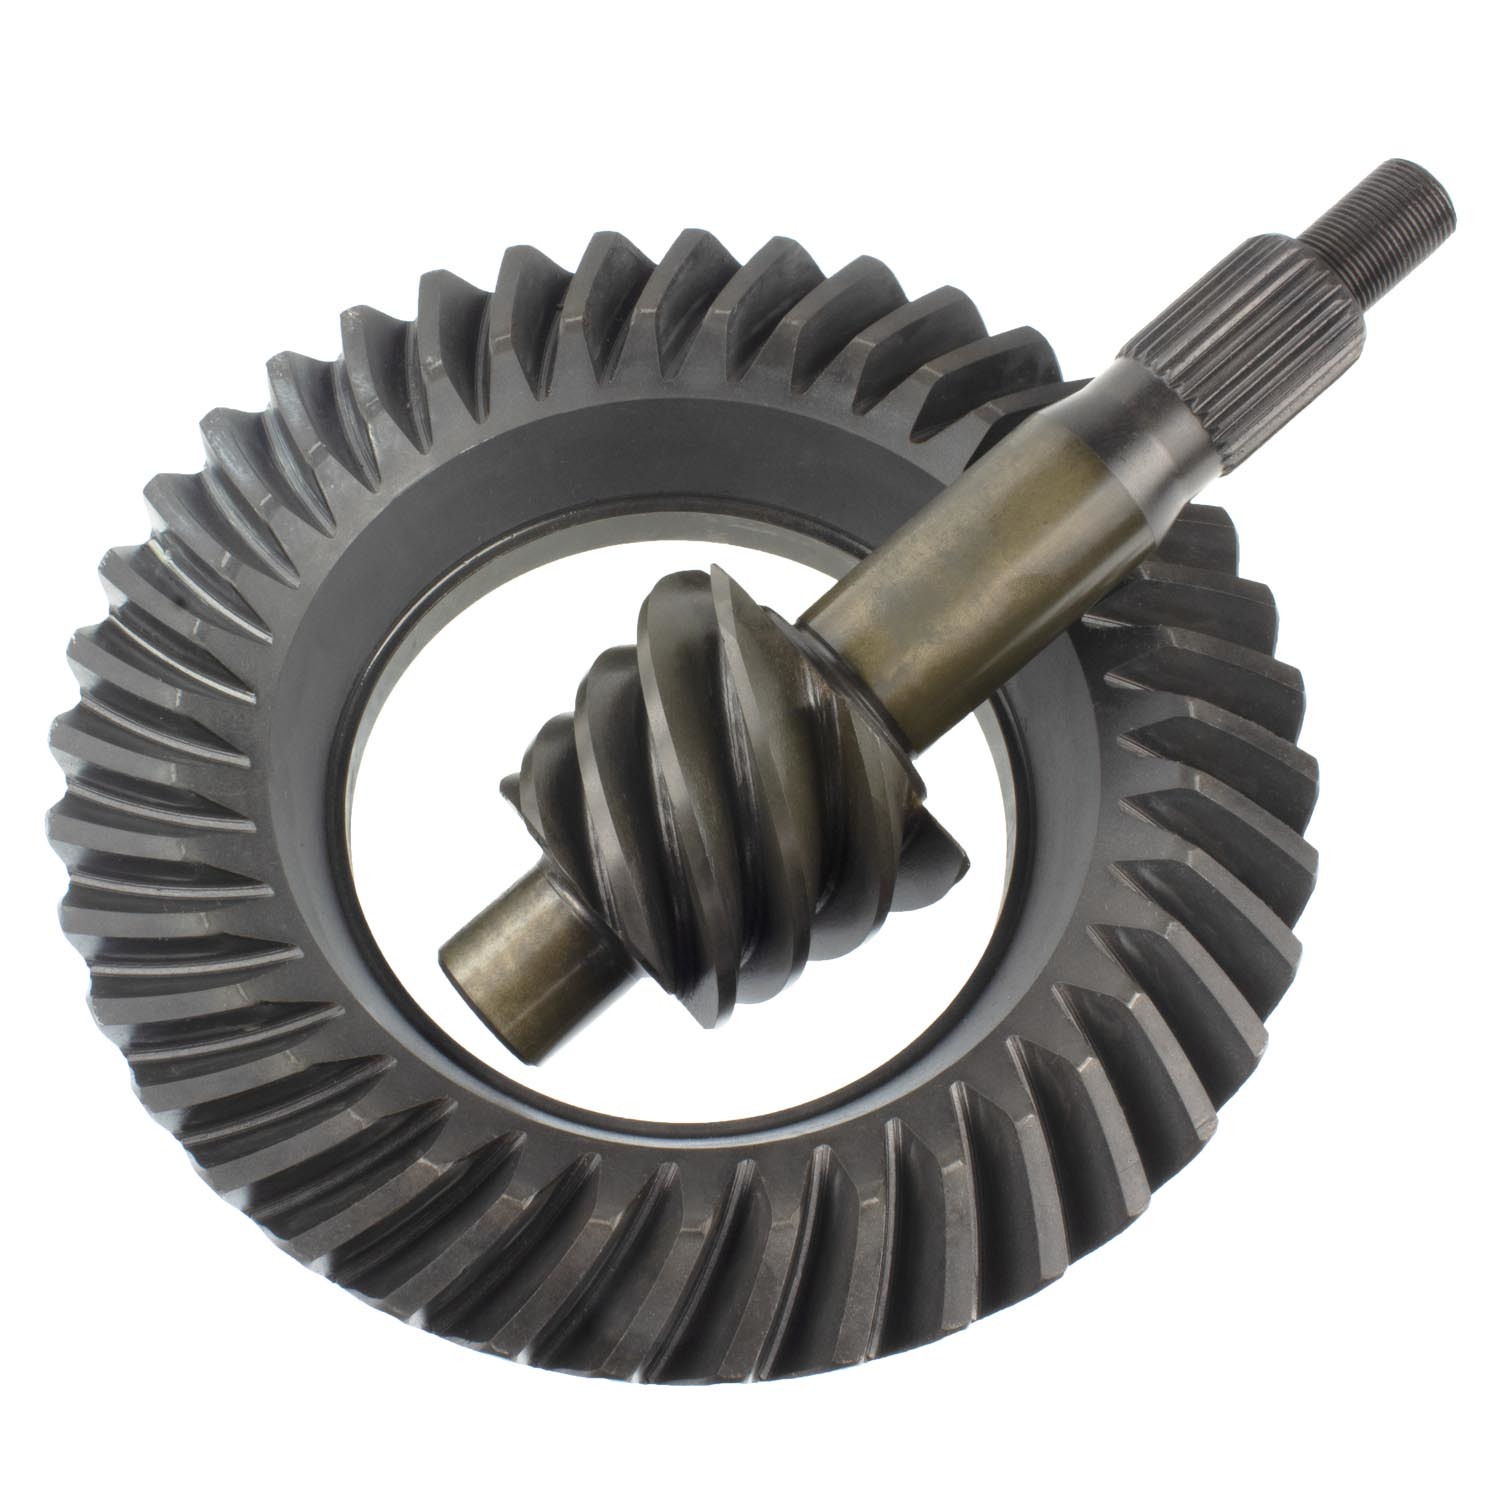 Richmond Gear F9650 - Ring and Pinion, Excel, 6.50 Ratio, 28 Spline Pinion, Ford 9 in, Kit